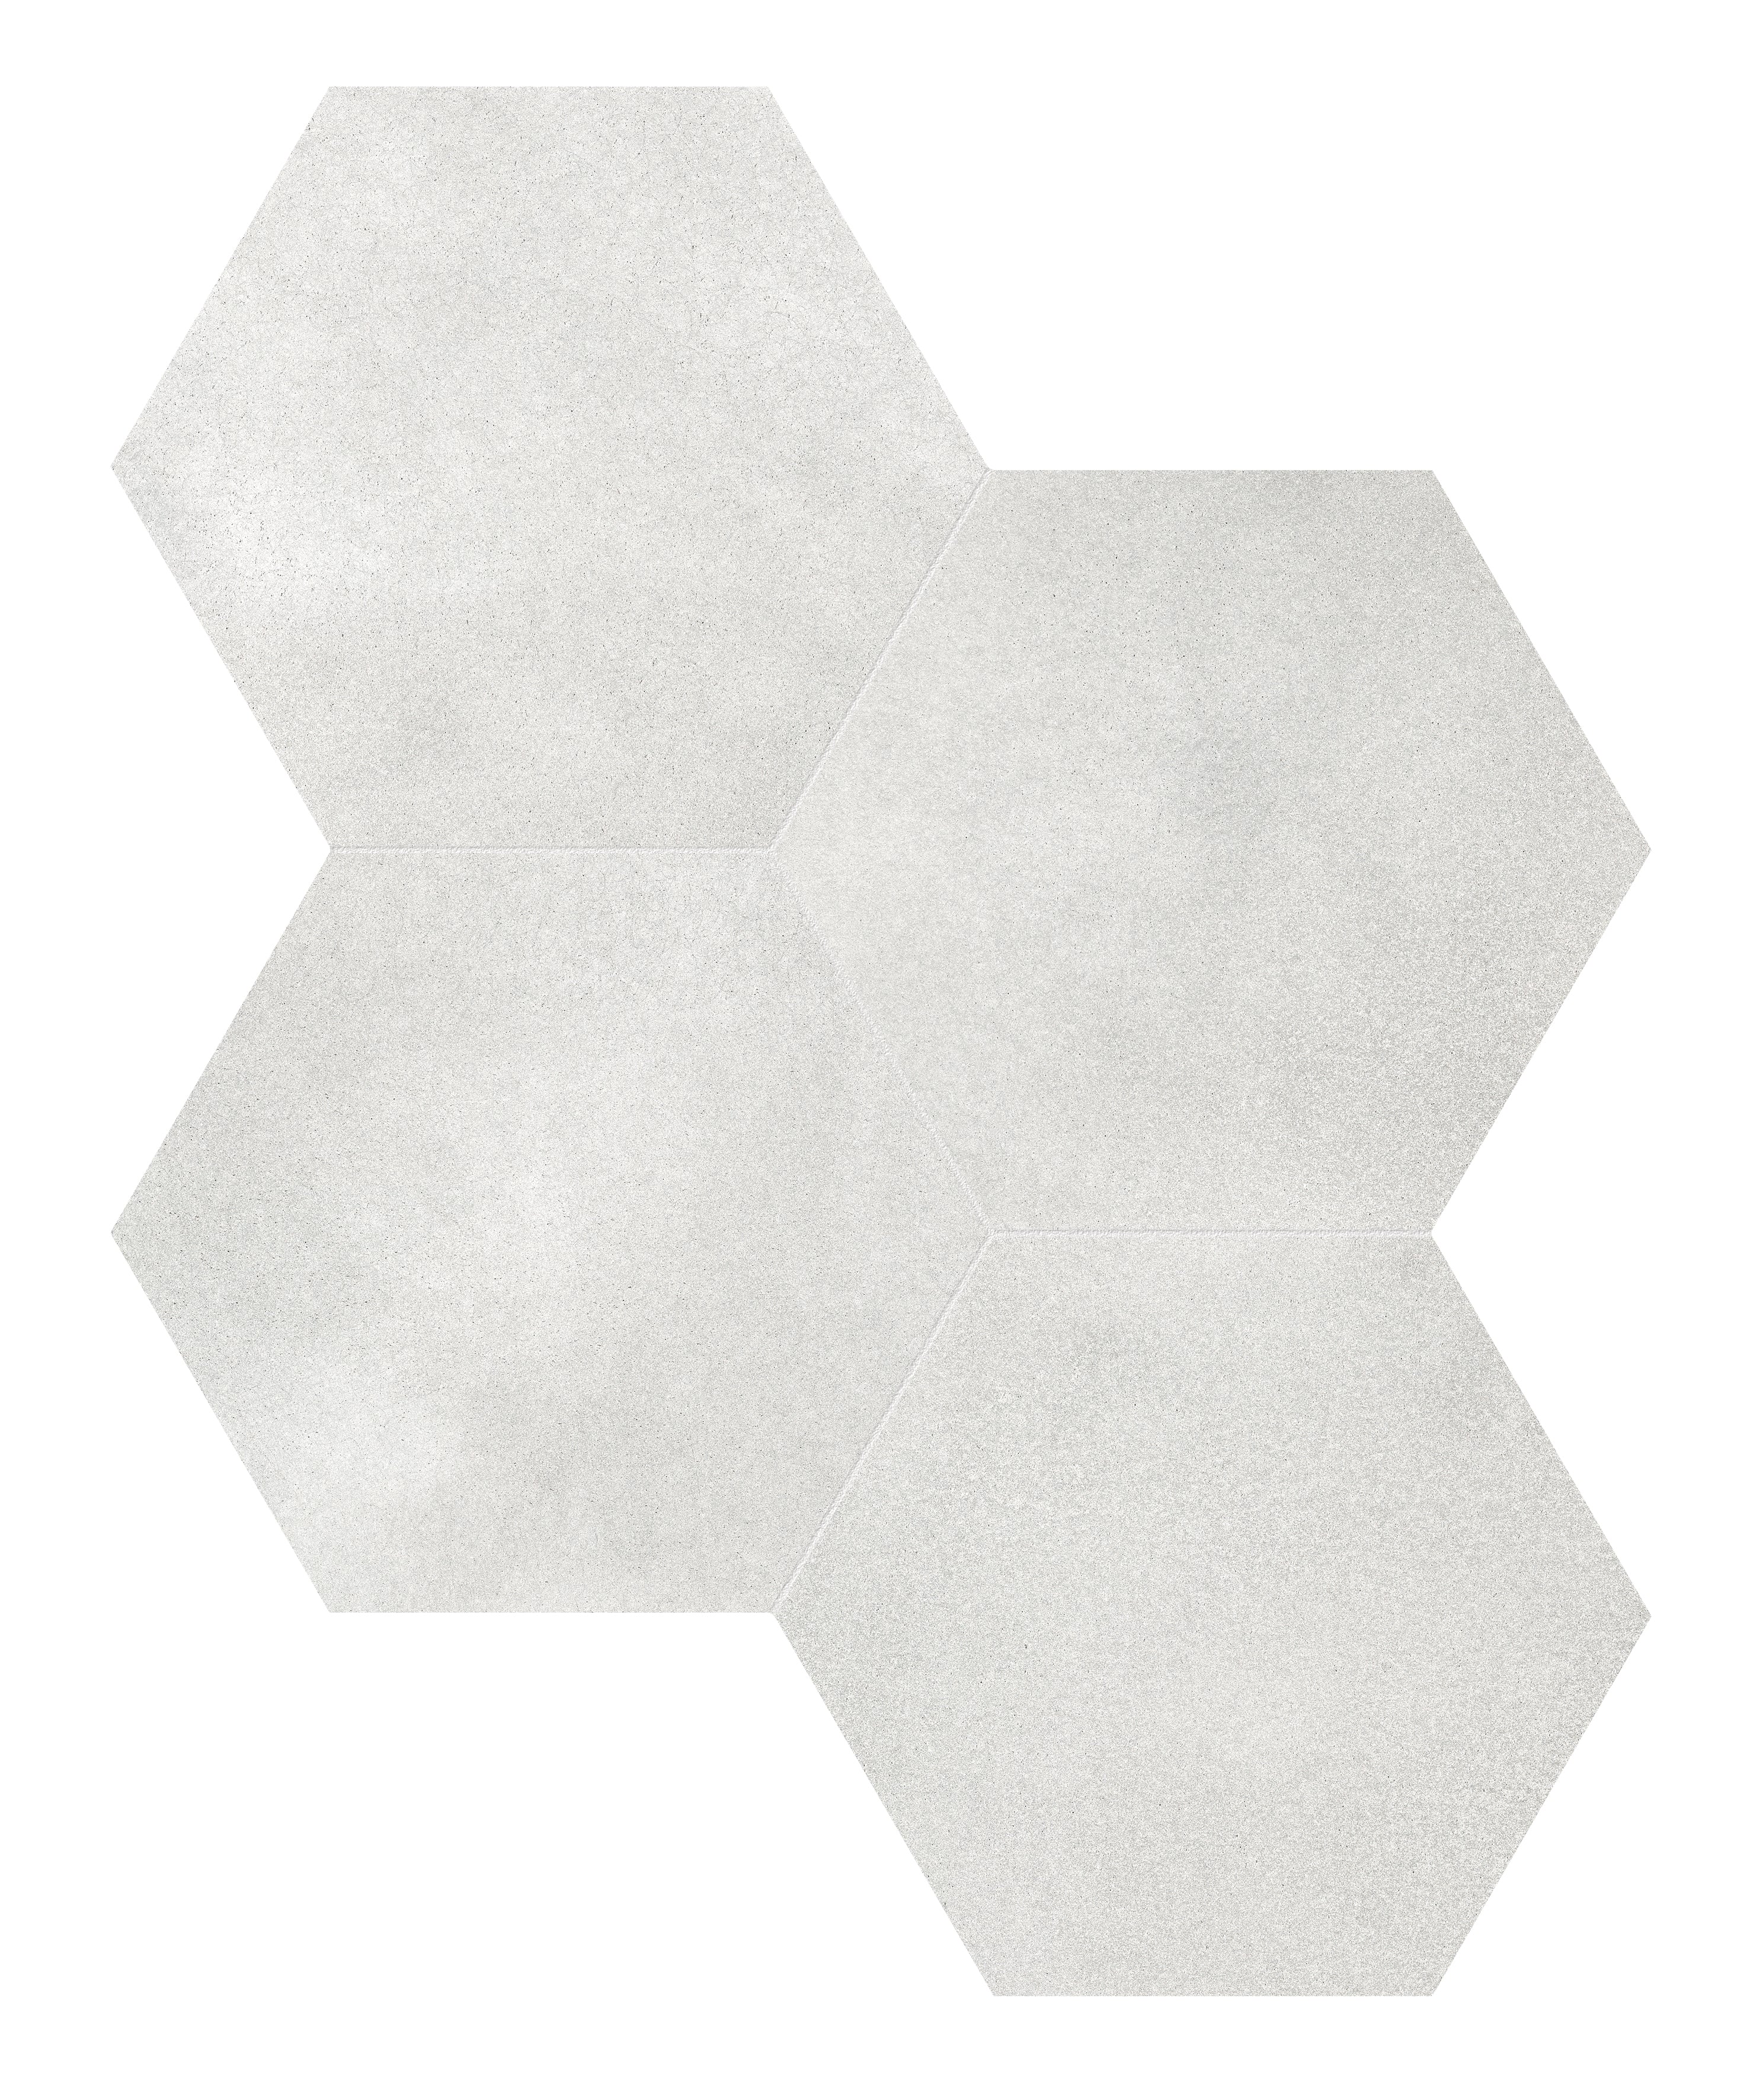 grey denim pattern glazed porcelain field tile from tapestri anatolia collection distributed by surface group international matte finish pressed edge 8&5 hexagon shape